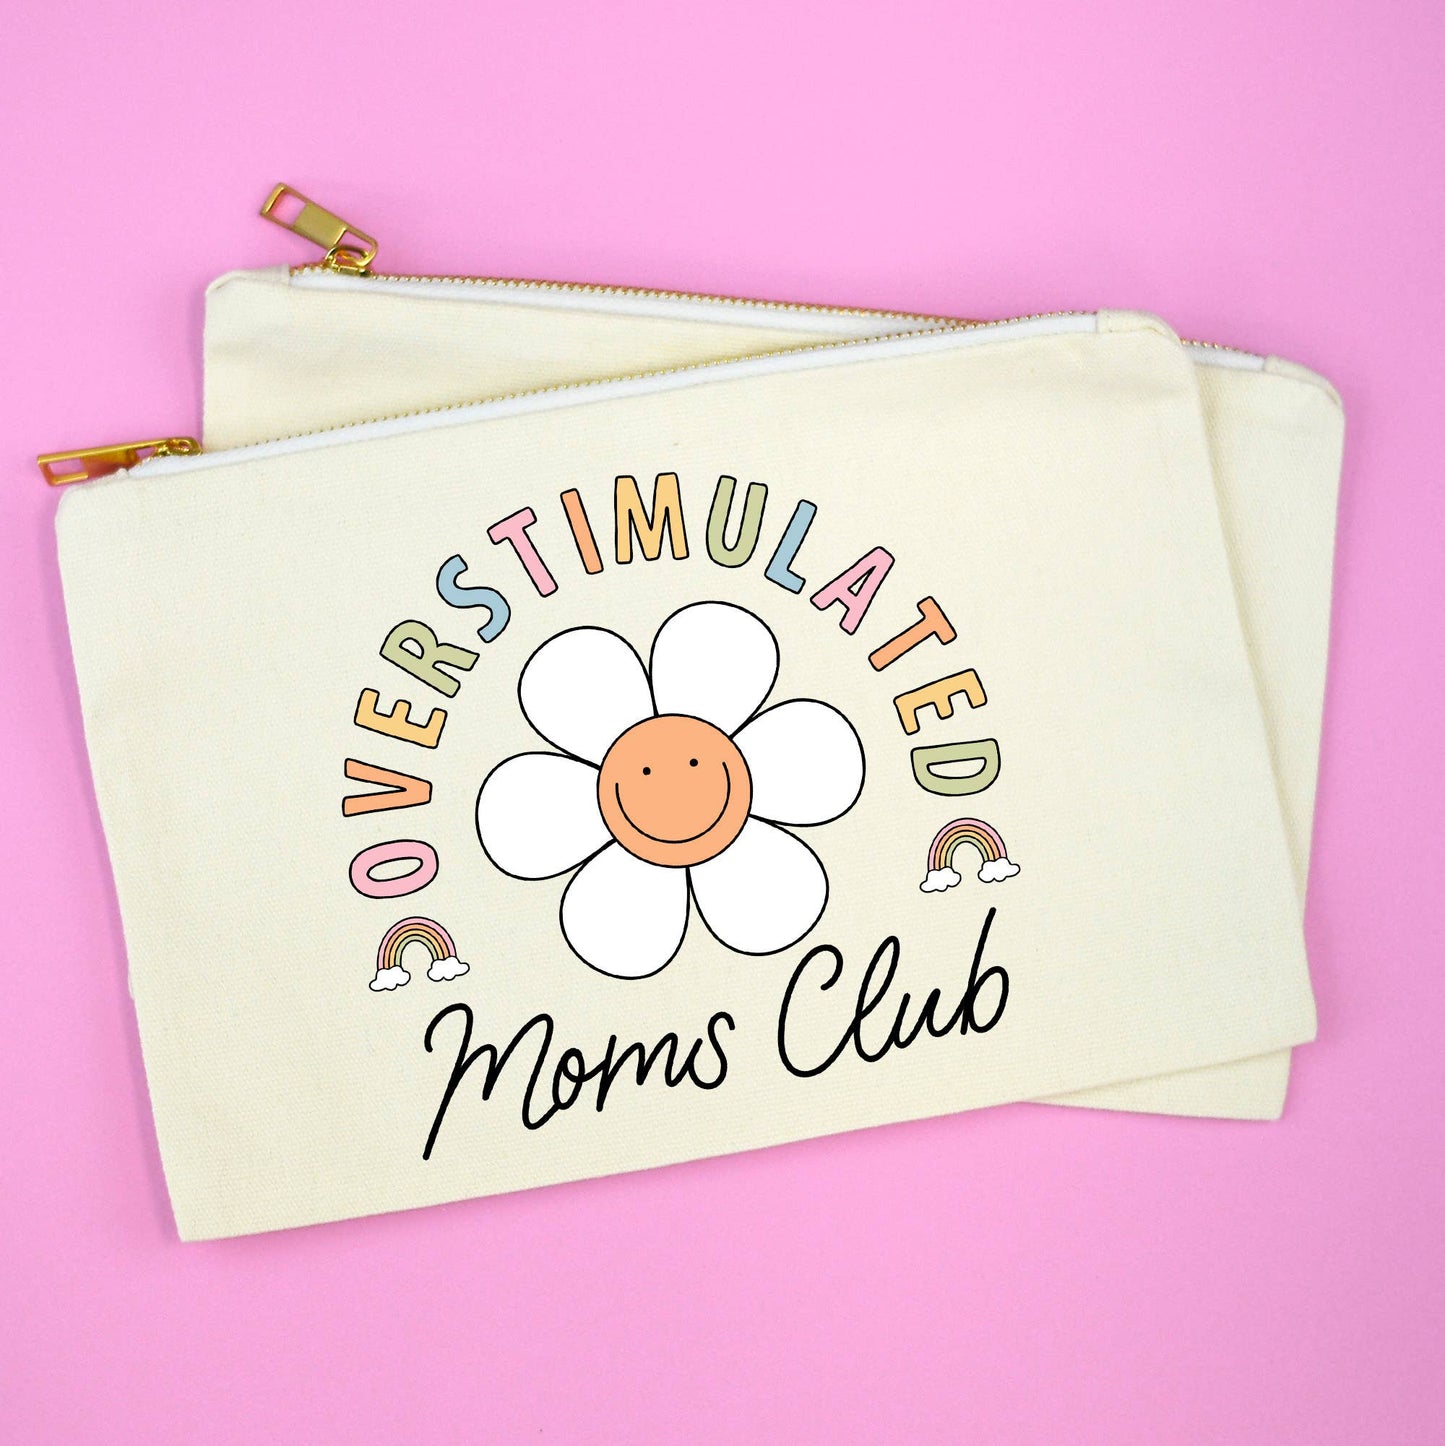 Overstimulated Mom's Club Cosmetic Bag, Makeup Bag